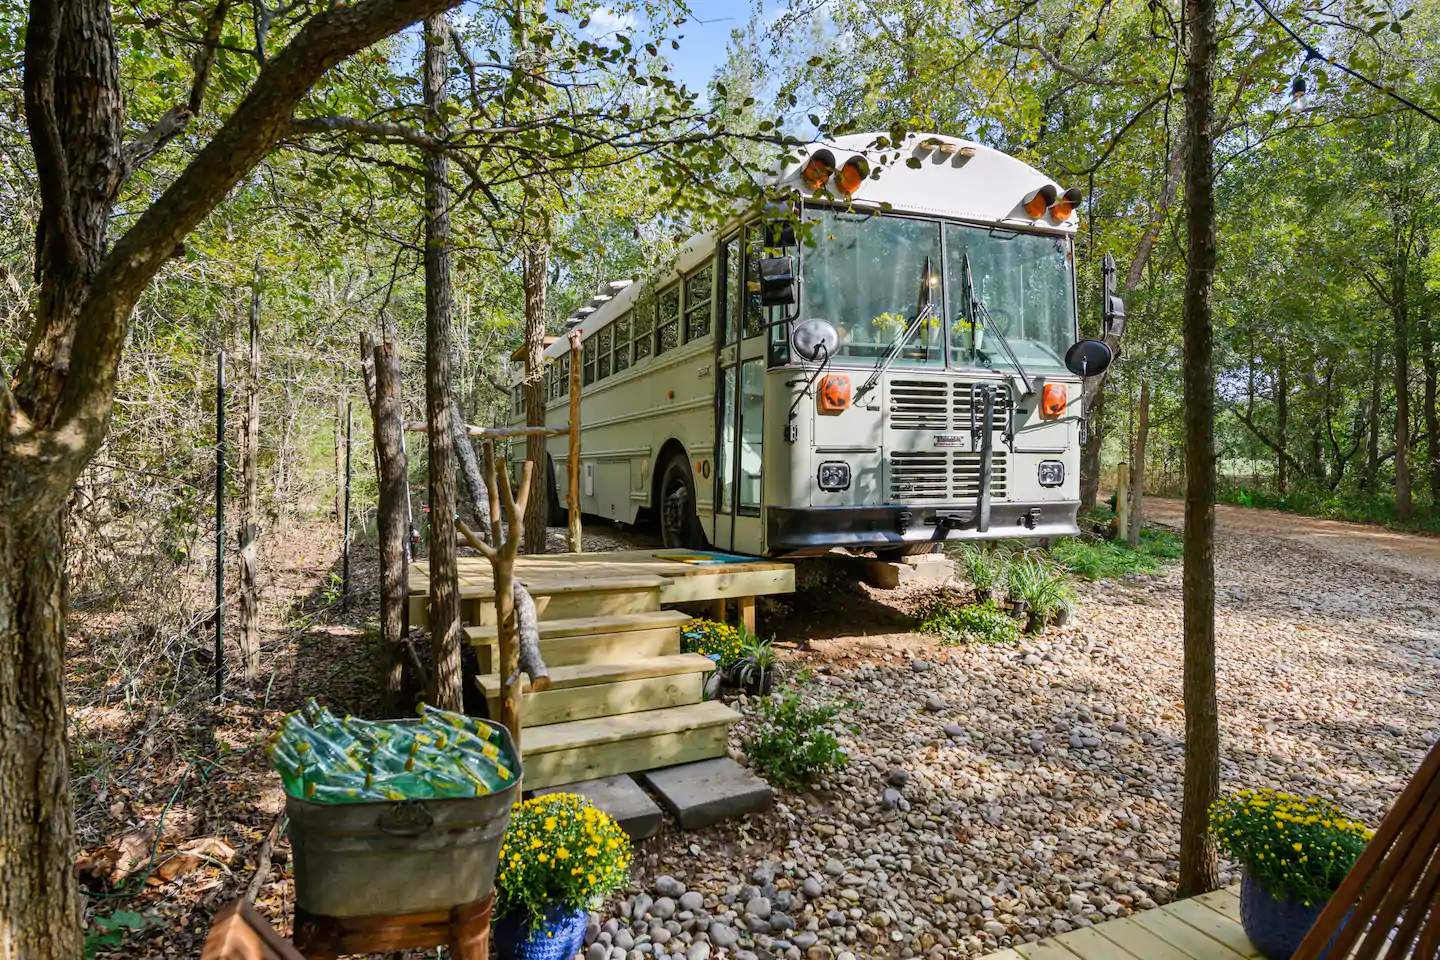 Retro school bus in the Texas Hill Country converted into cozy Airbnb